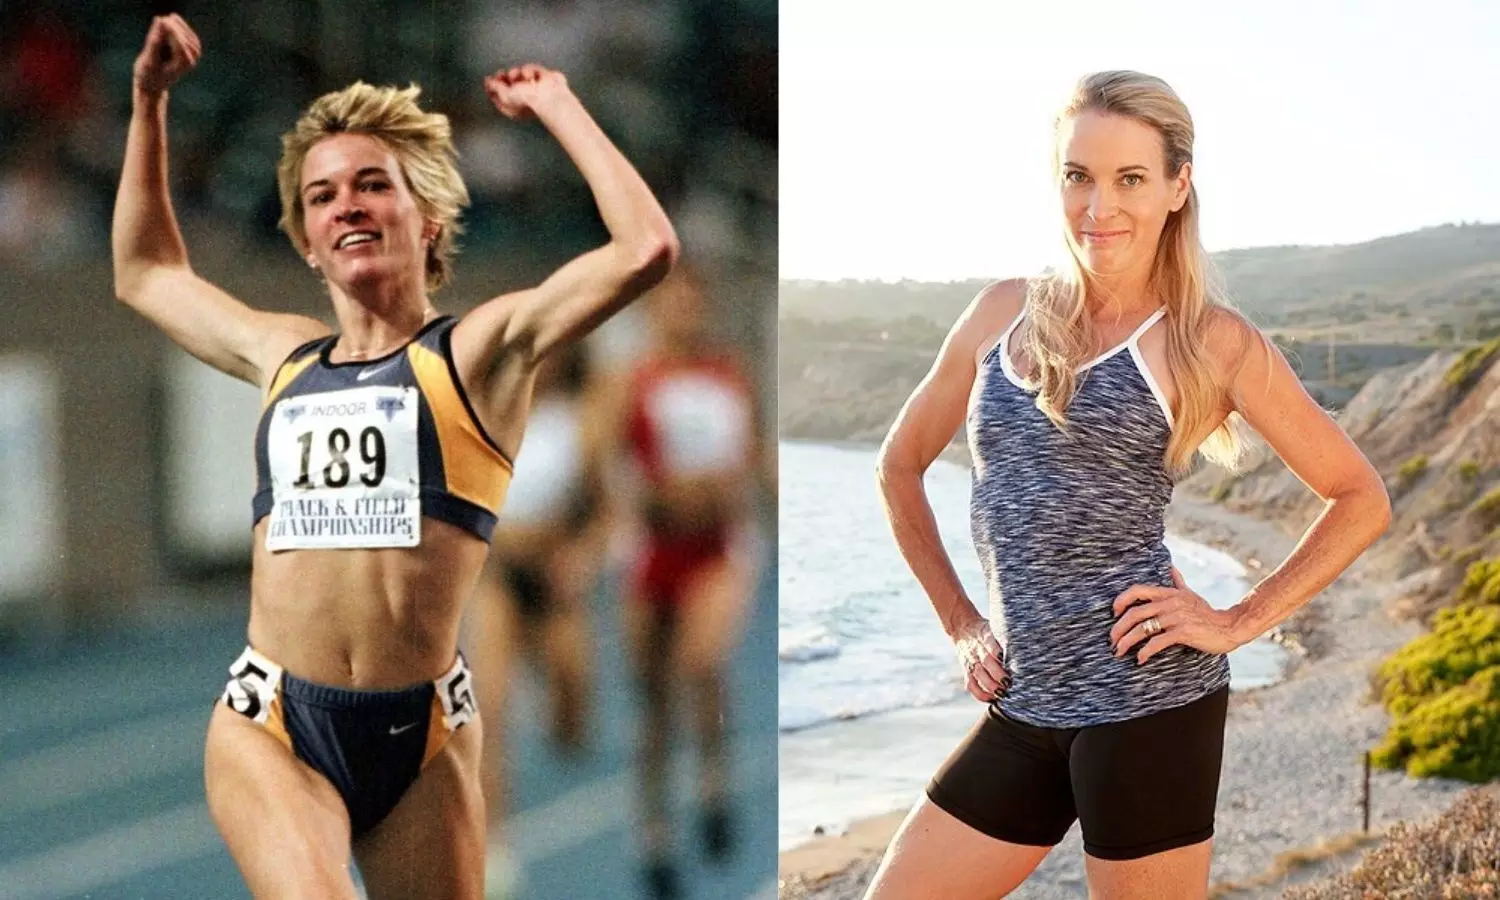 Himachl Girl Sexy Video - Suzy Hamilton â€” The story of an Olympics runner who resorted to prostitution